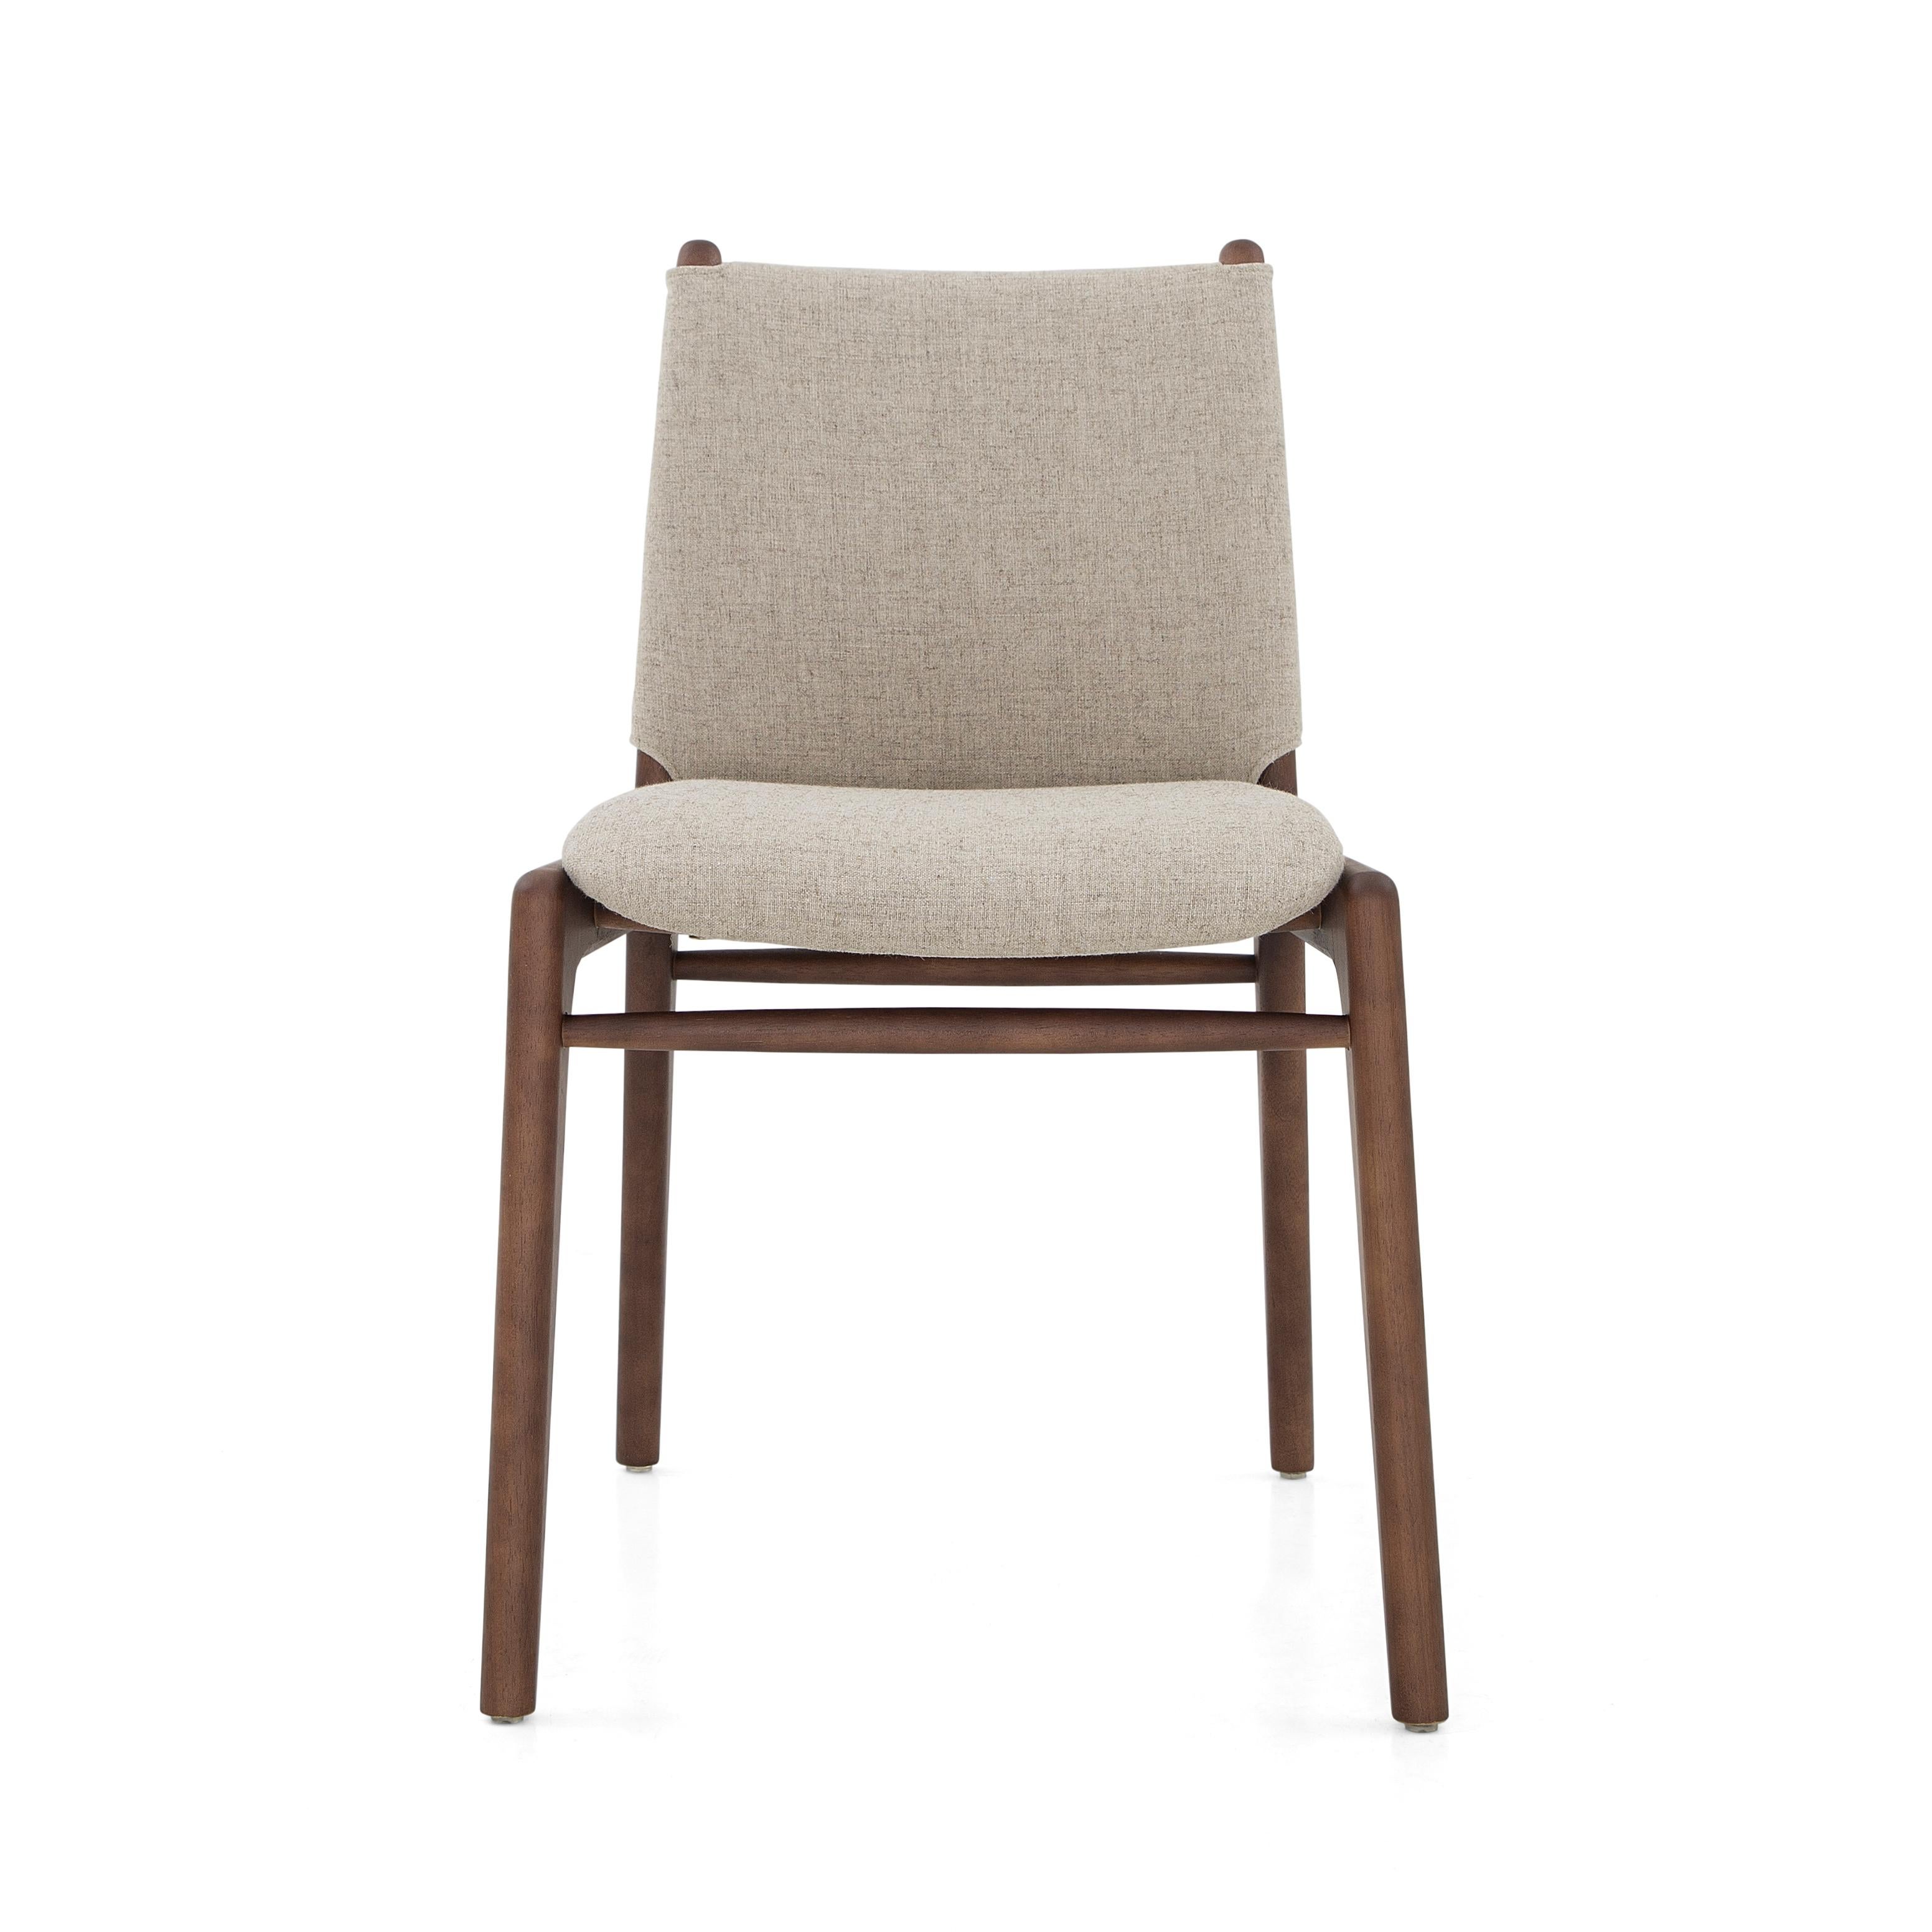 Brazilian Cappio Dining Chair in Walnut Wood Finish with Beige Fabric, set of 2 For Sale